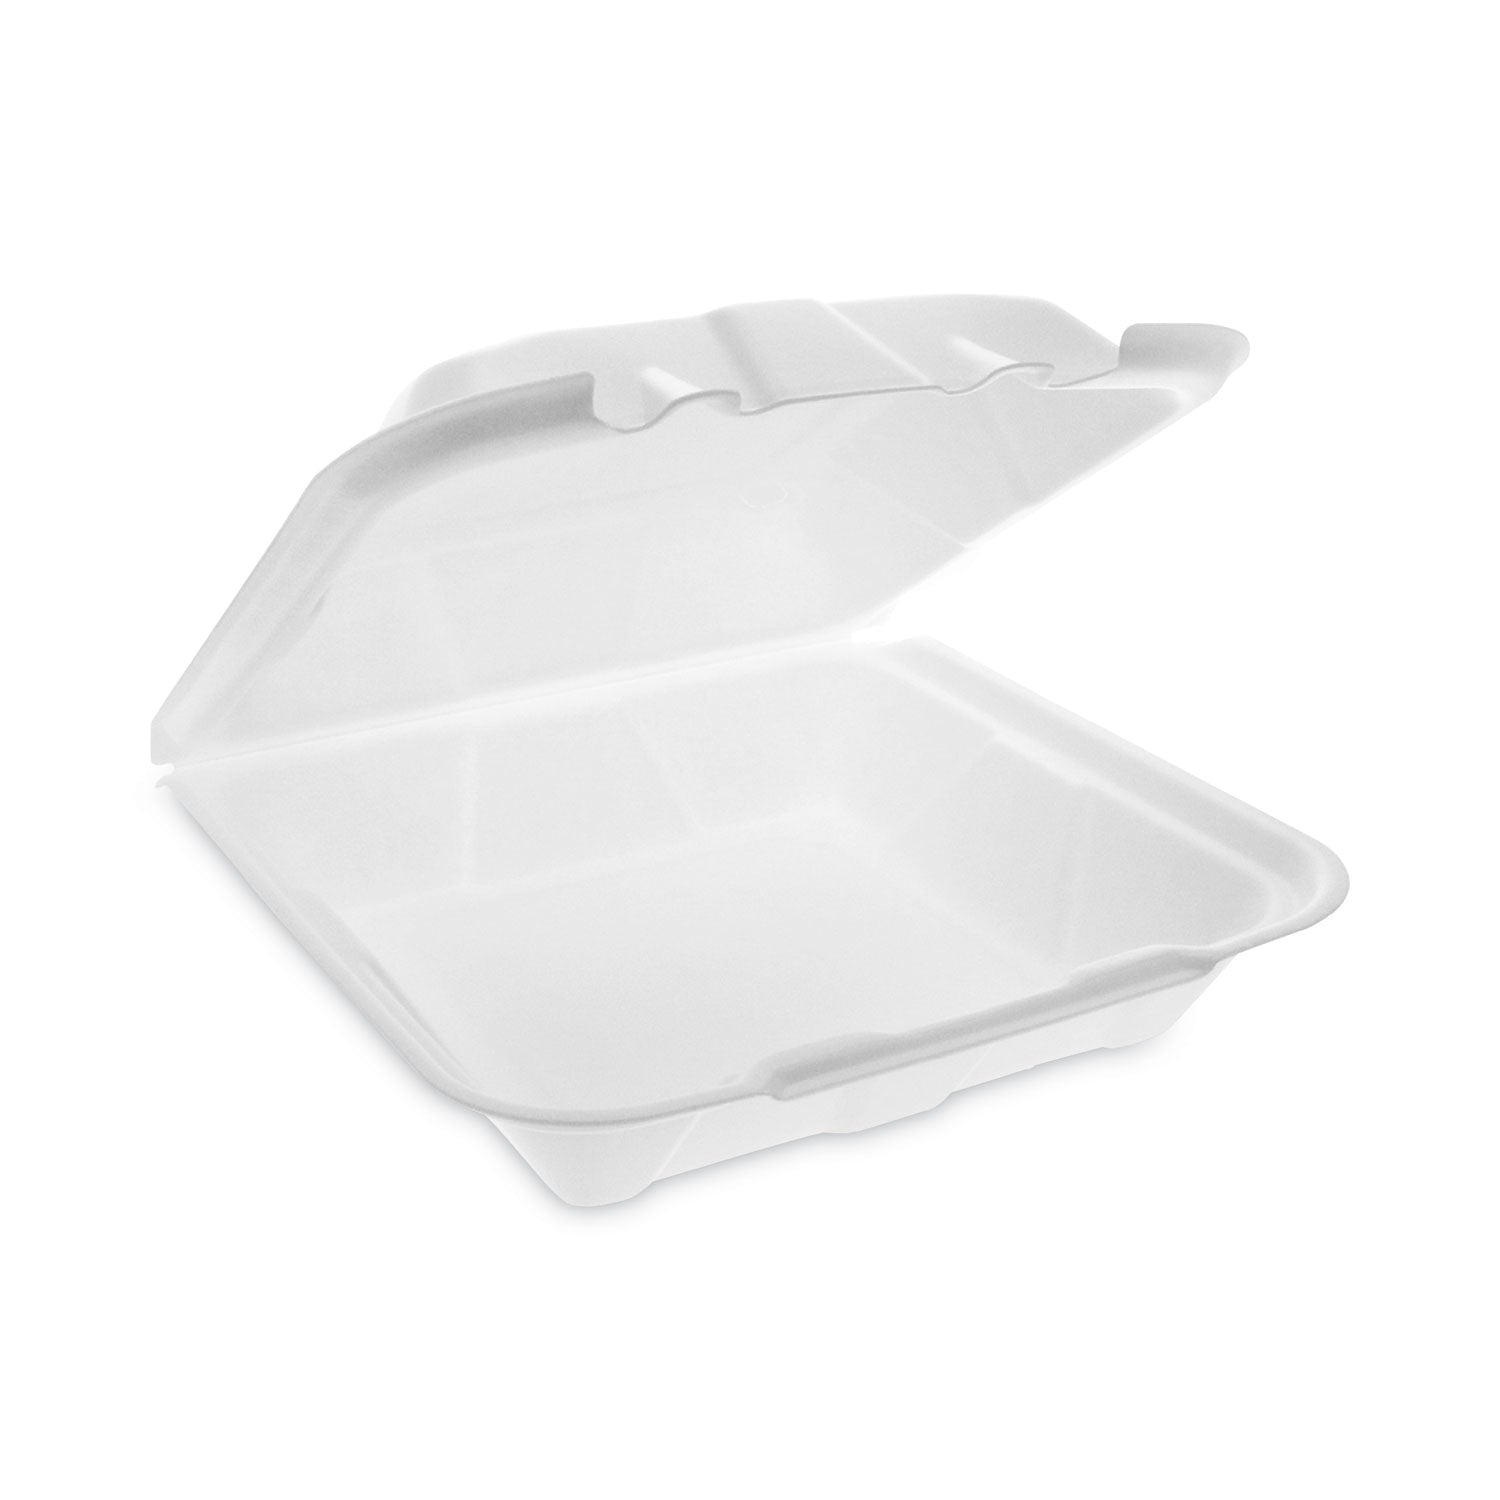 vented-foam-hinged-lid-container-dual-tab-lock-economy-913-x-9-x-325-white-150-carton_pctytd19901econ - 1